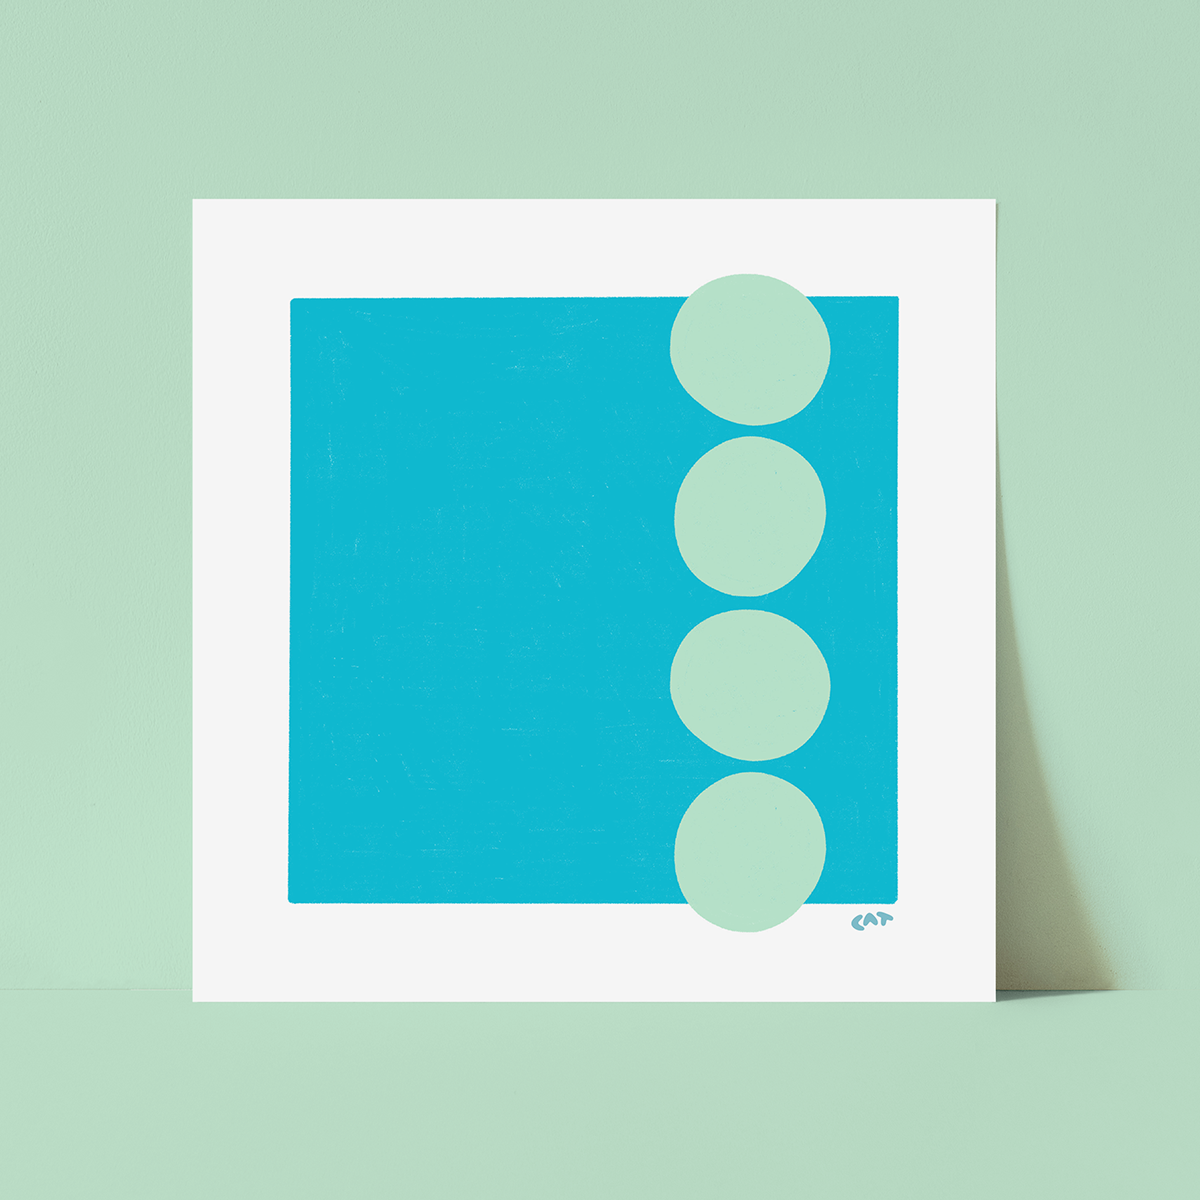 White unframed print of a medium blue square with four light blue circles lined up vertically on the right side of the medium blue square.